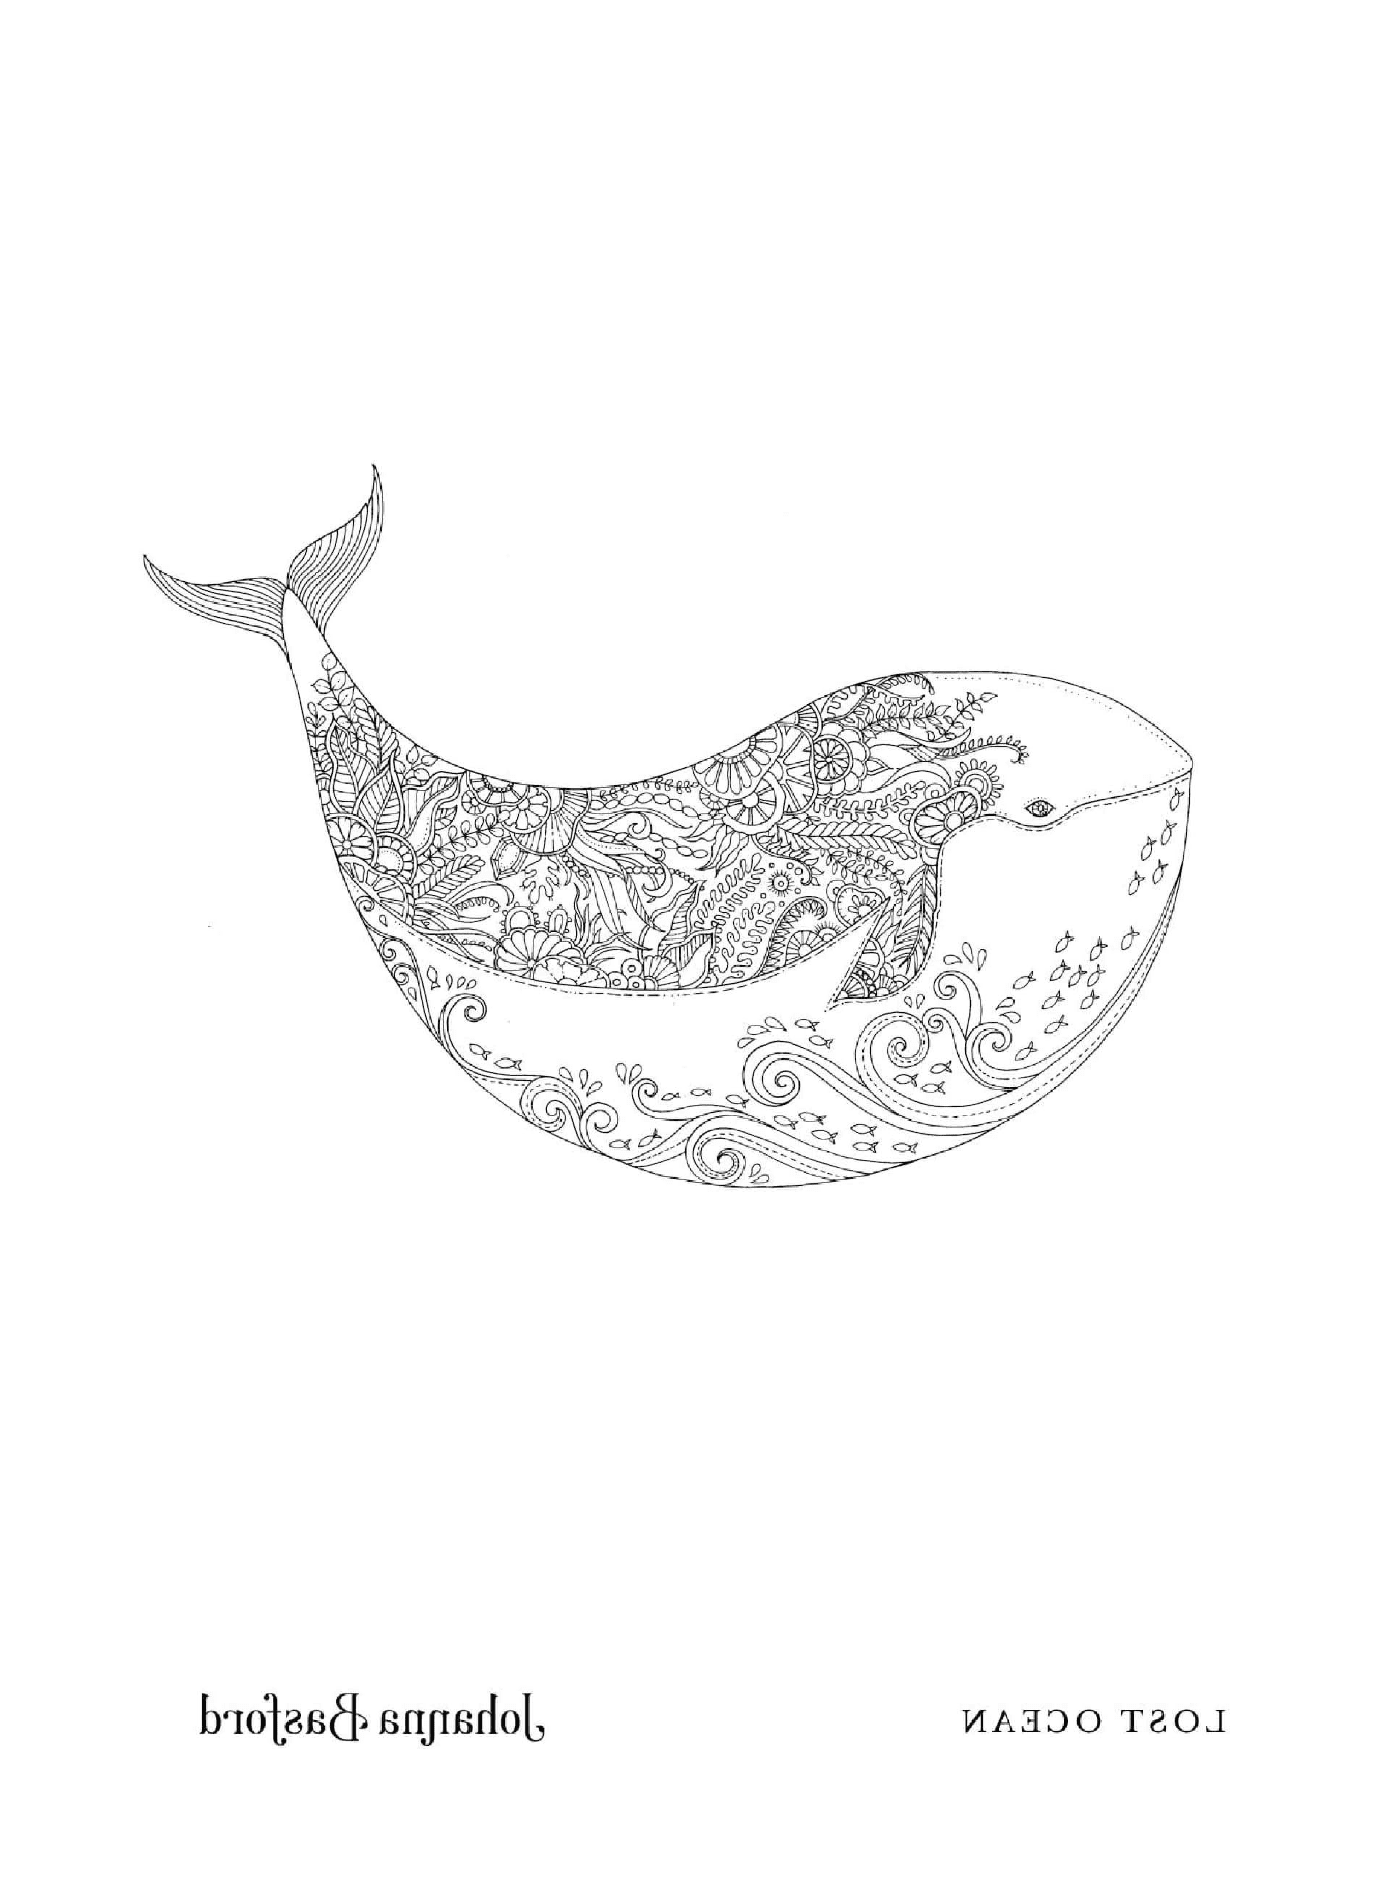  A whale with a floral pattern 